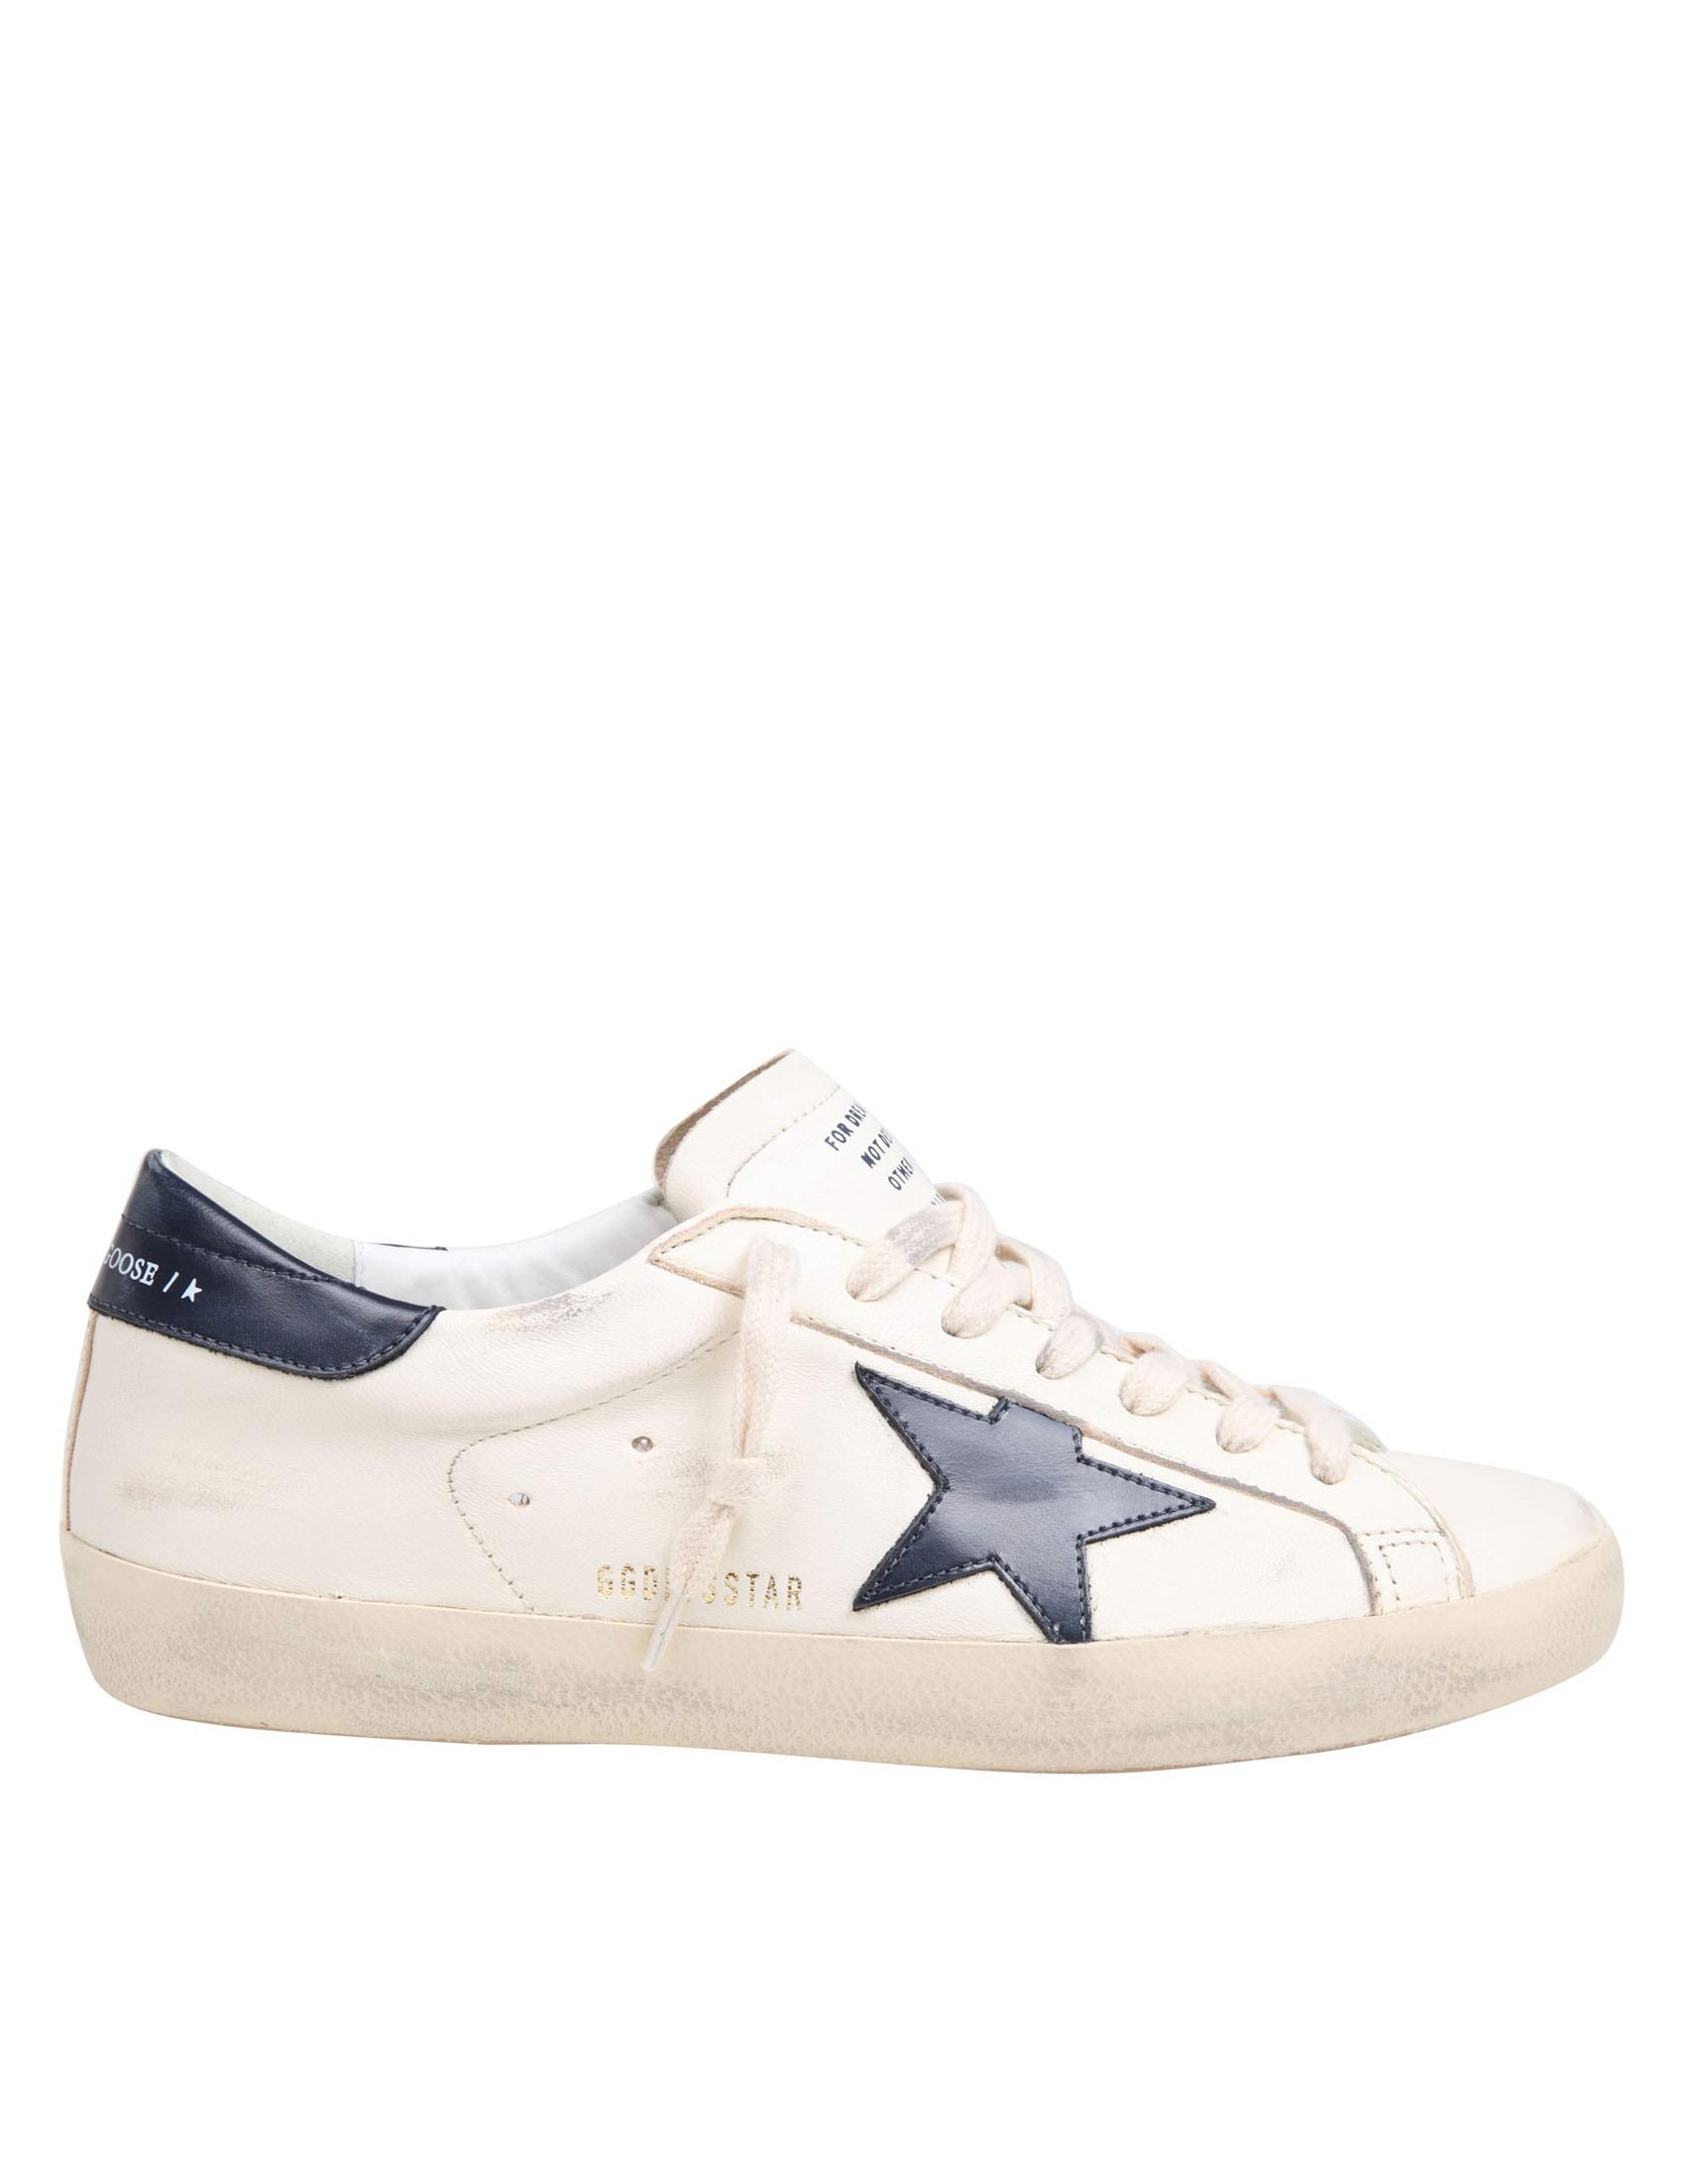 GOLDEN GOOSE SUPER-STAR SNEAKERS IN BEIGE AND MIDNIGHT BLUE LEATHER